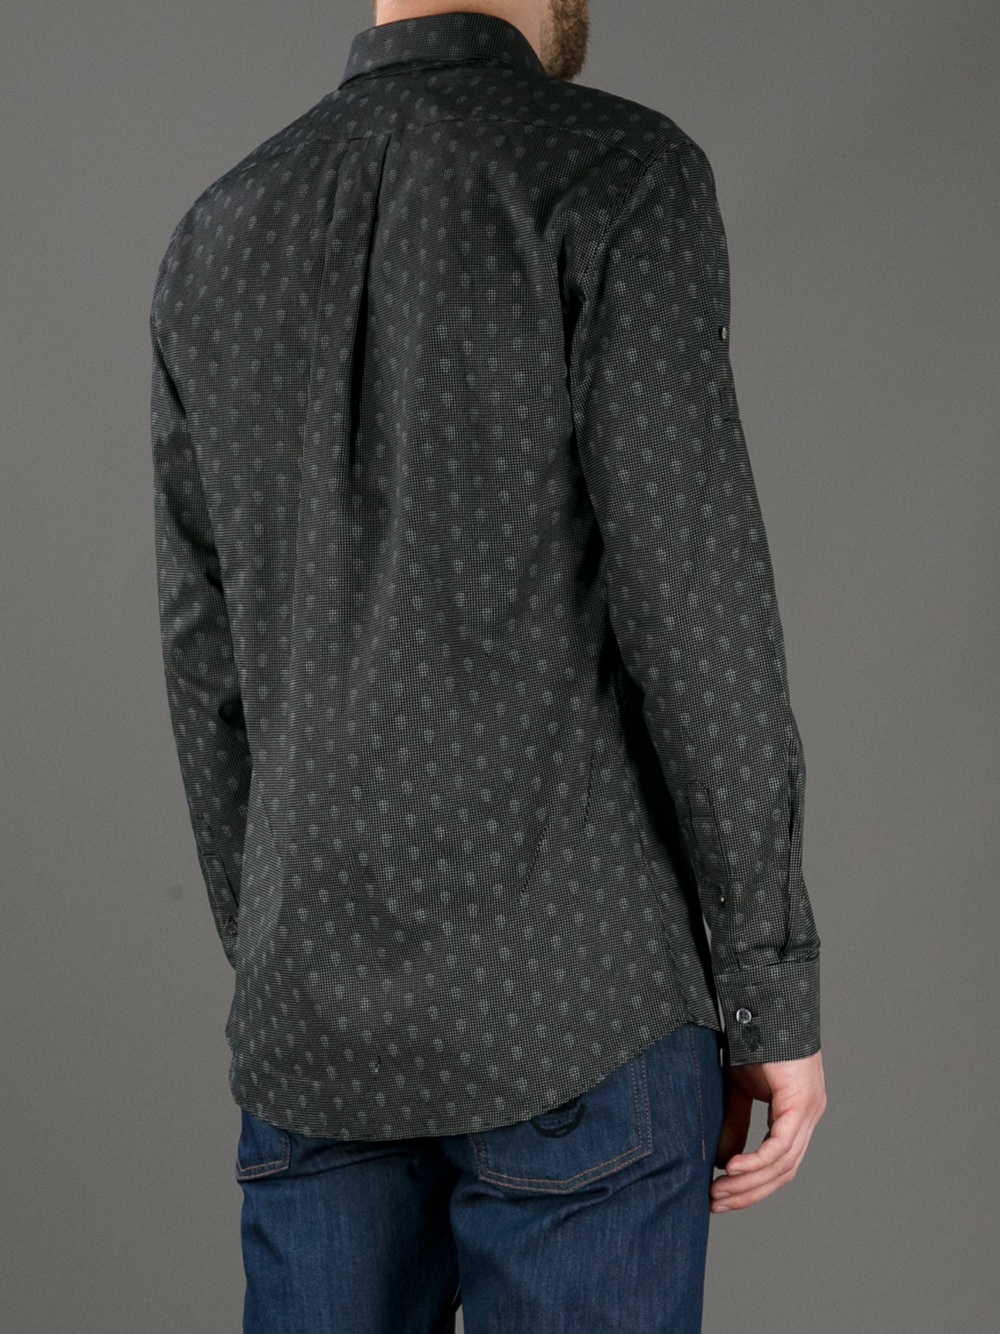 Alexander McQueen Spotted Button Down Shirt in Black for Men - Lyst